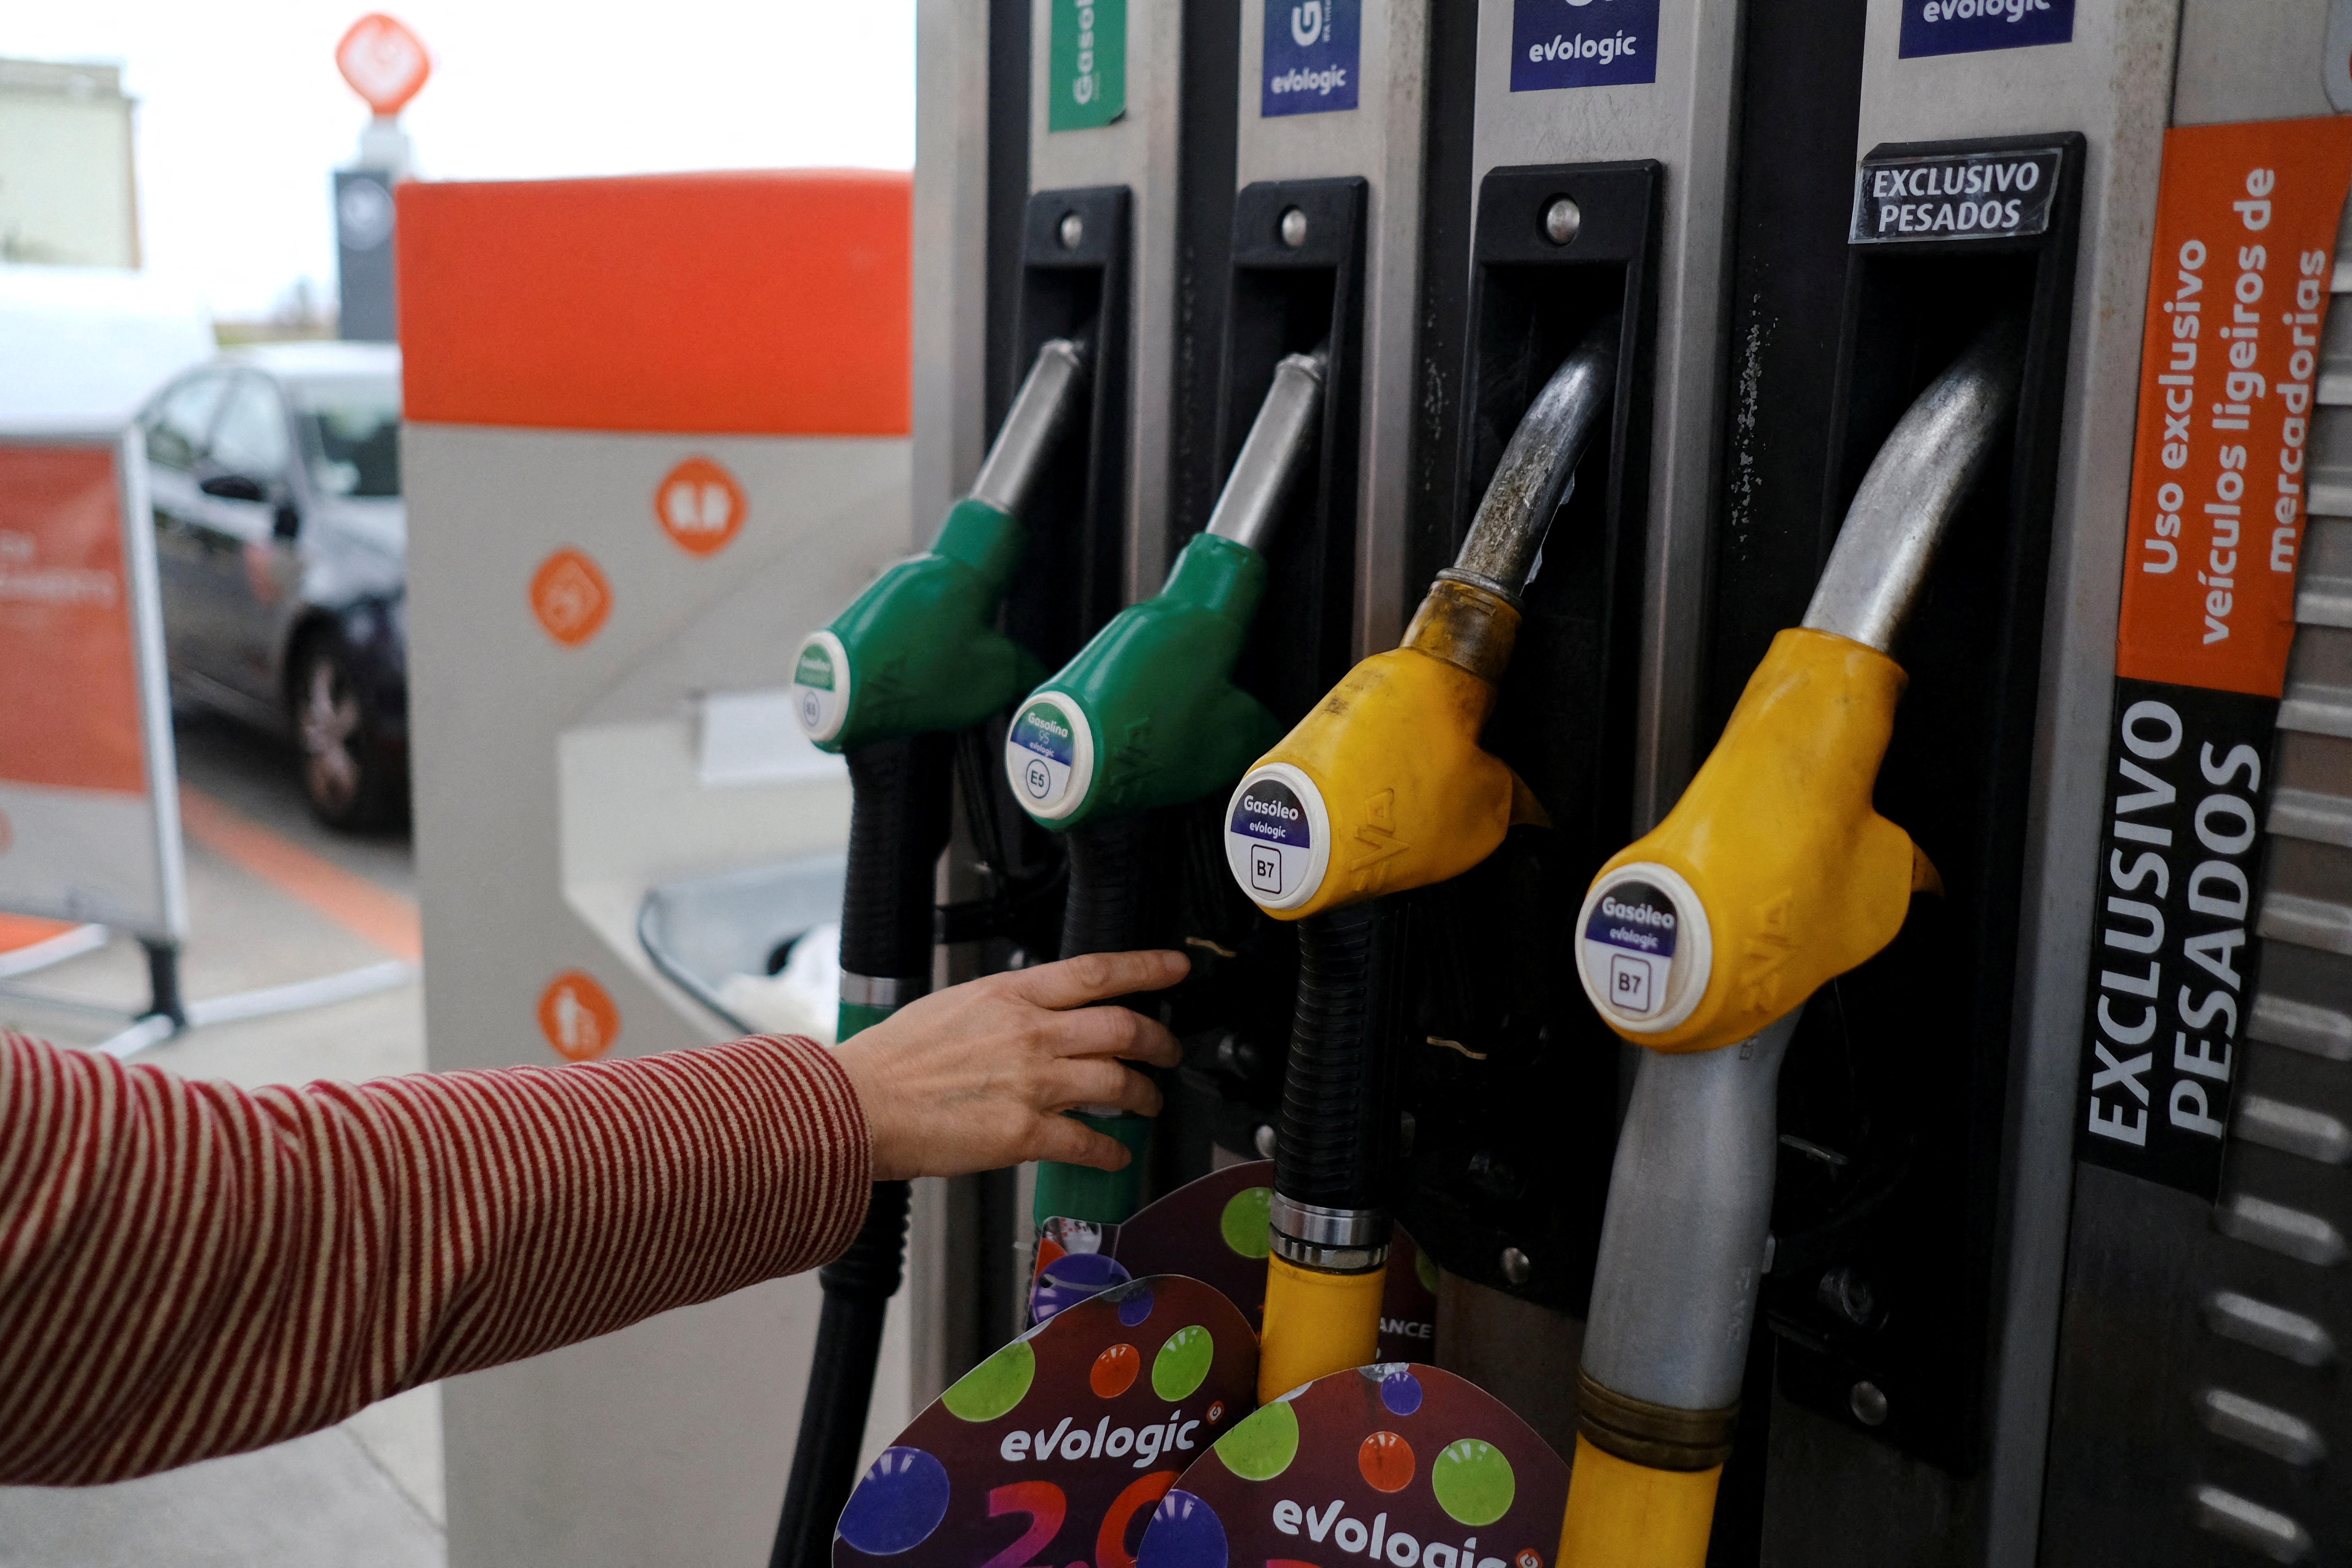 A person uses a petrol pump, as the price of petrol rises, in Lisbon